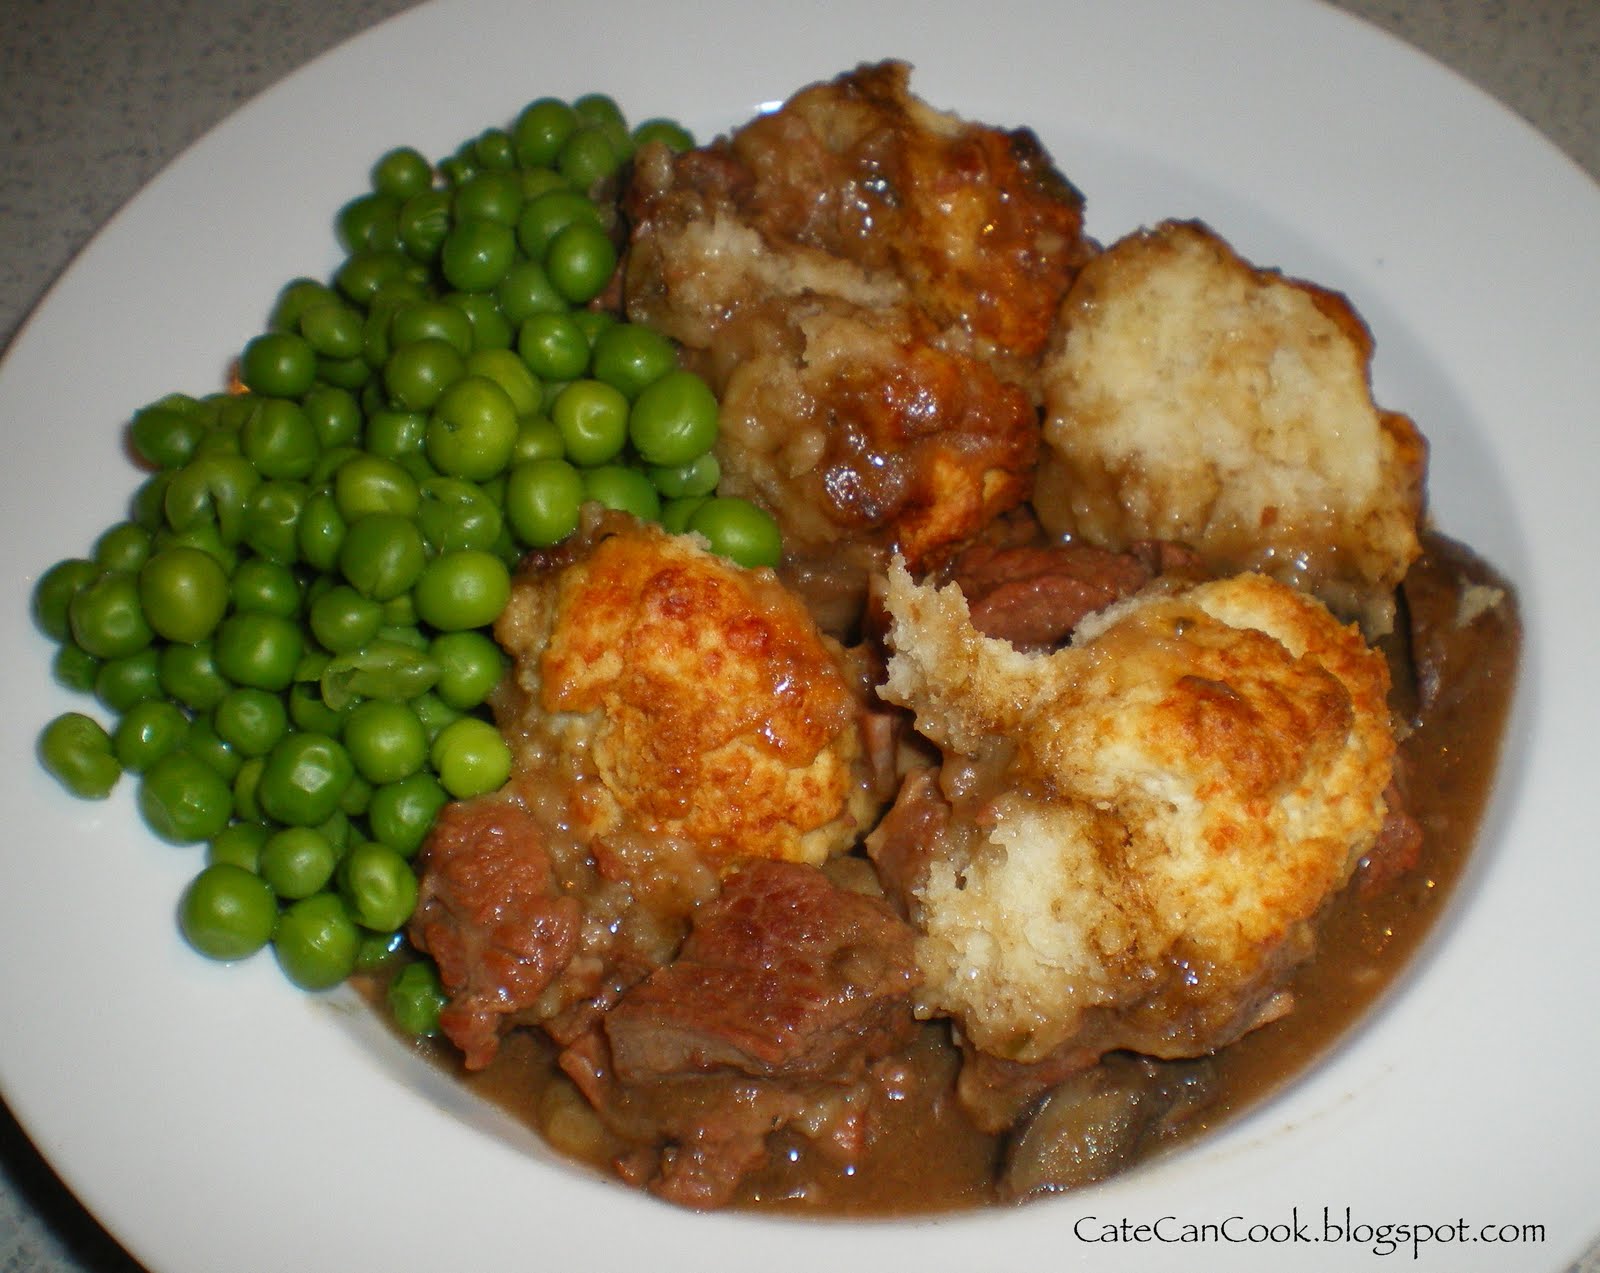 Cate Can Cook, So Can You!!: Beef and Guinness Casserole with Parmesan ...